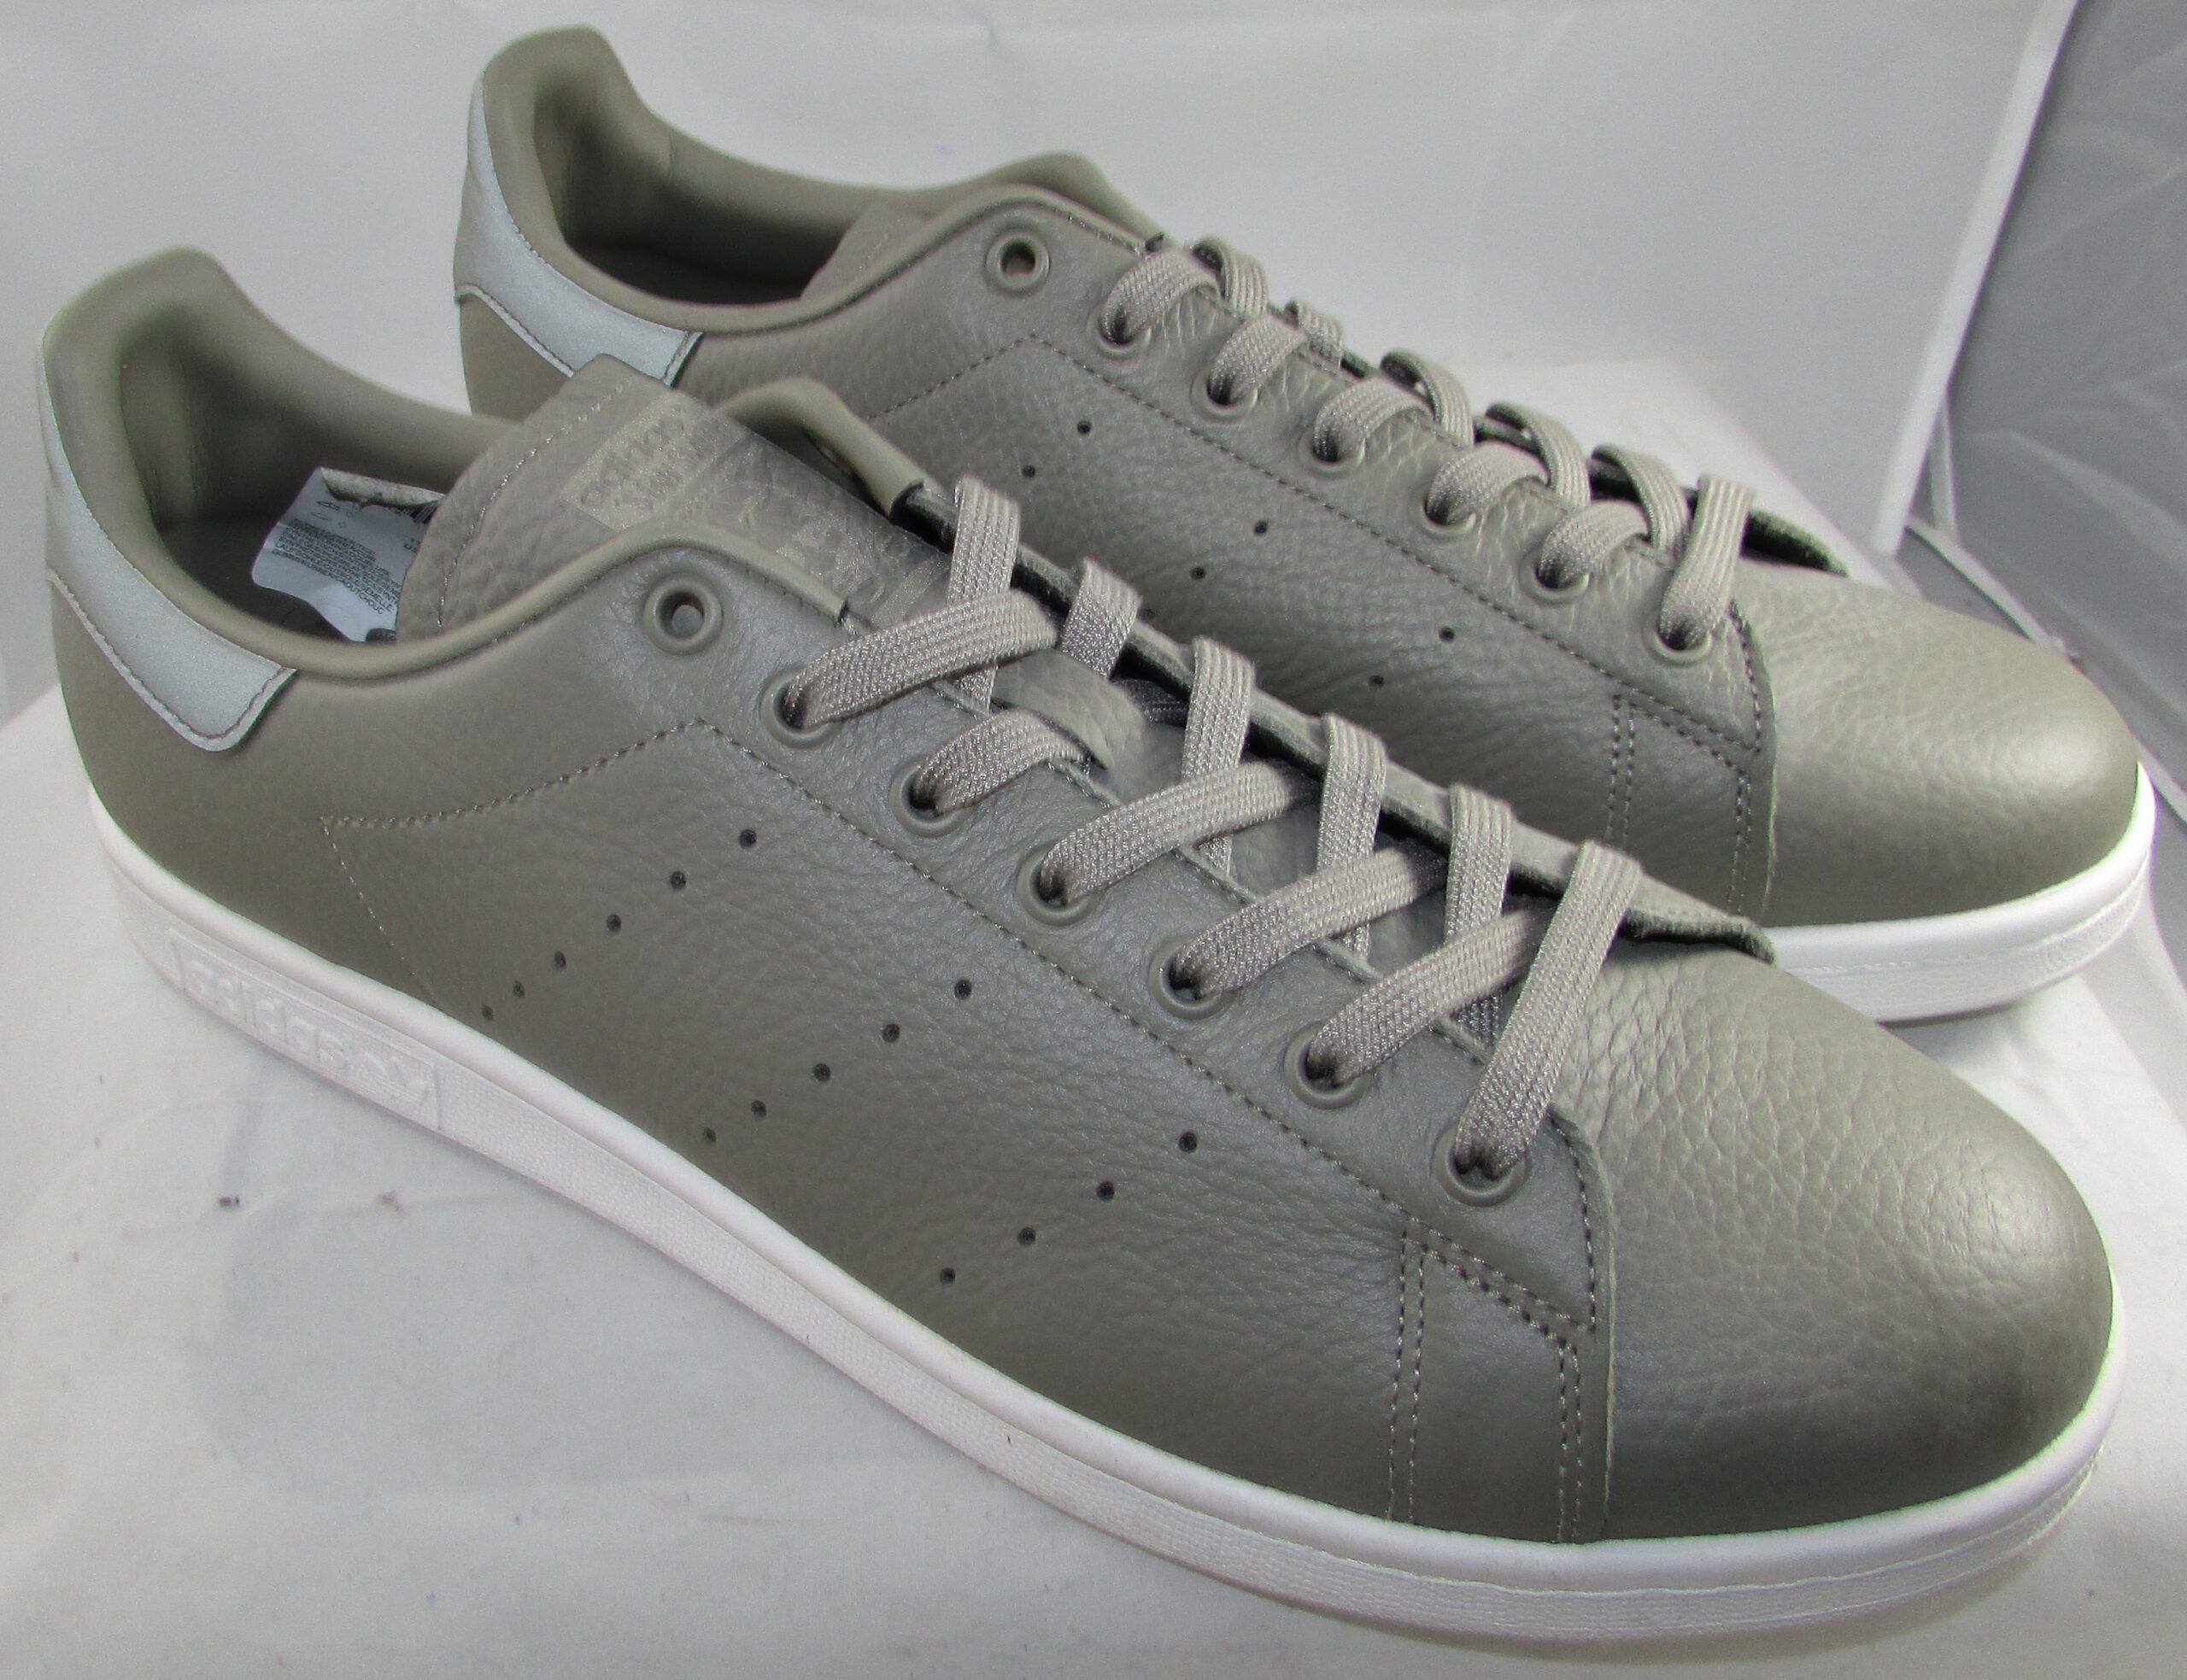 Adidas Stan Smith Olive Trace Cargo Shoes Size 11.5 Brand New - Heet On ...